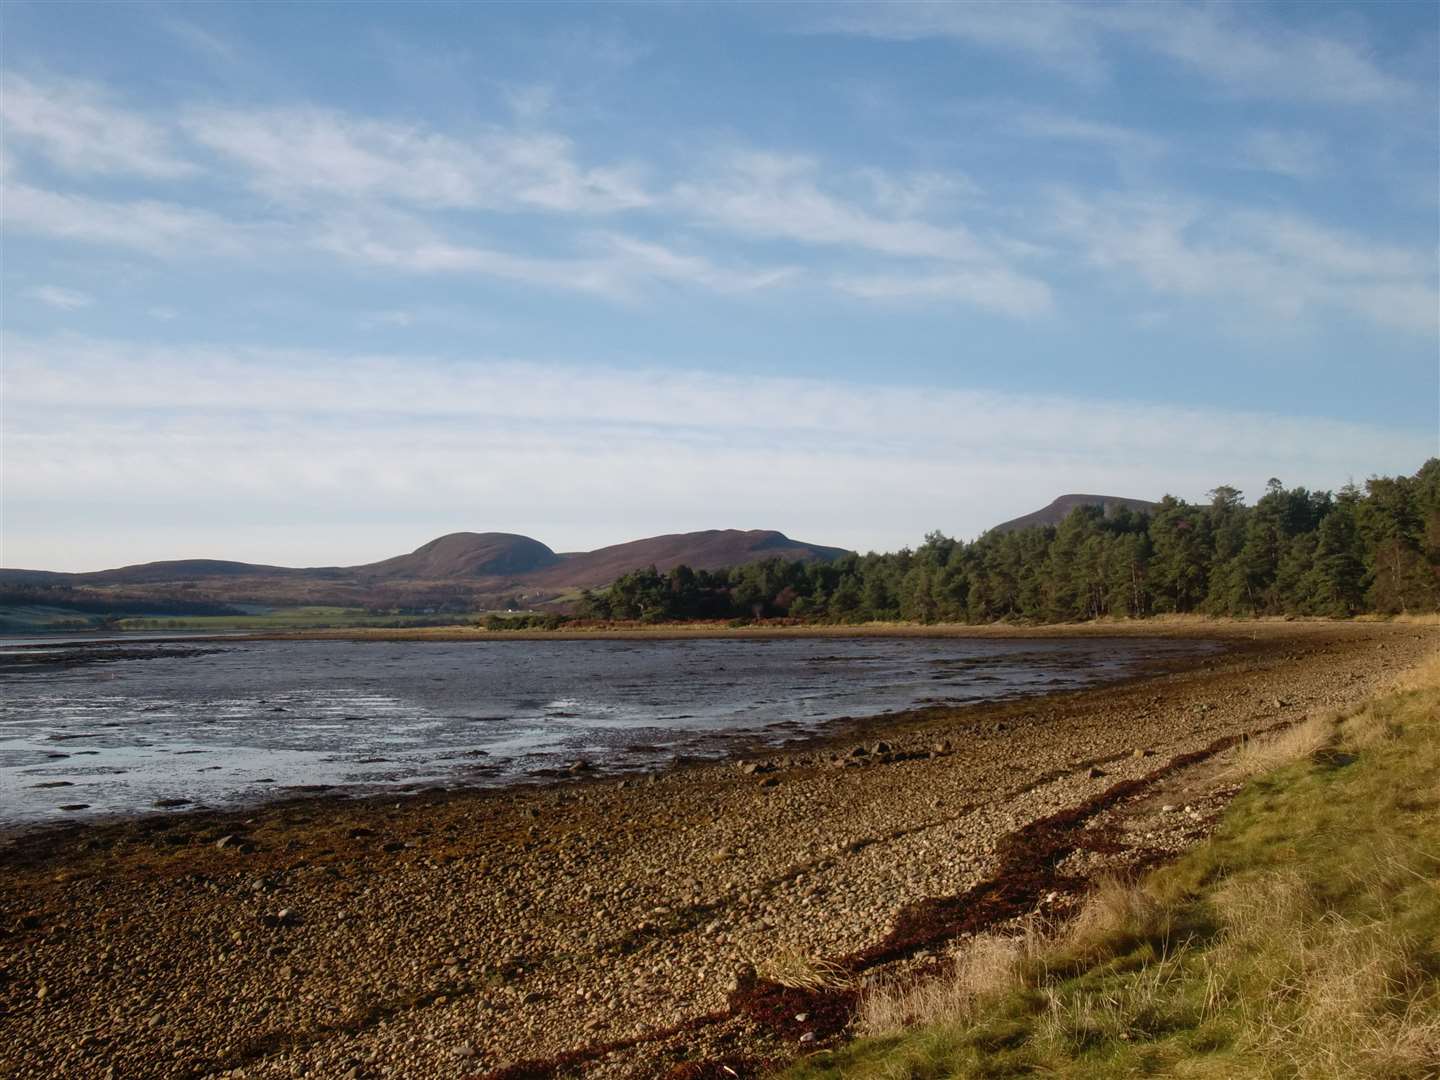 Loch Fleet is a sea loch that connects to the Dornoch Firth via a narrow channel between Coul Links and Ferry Links.